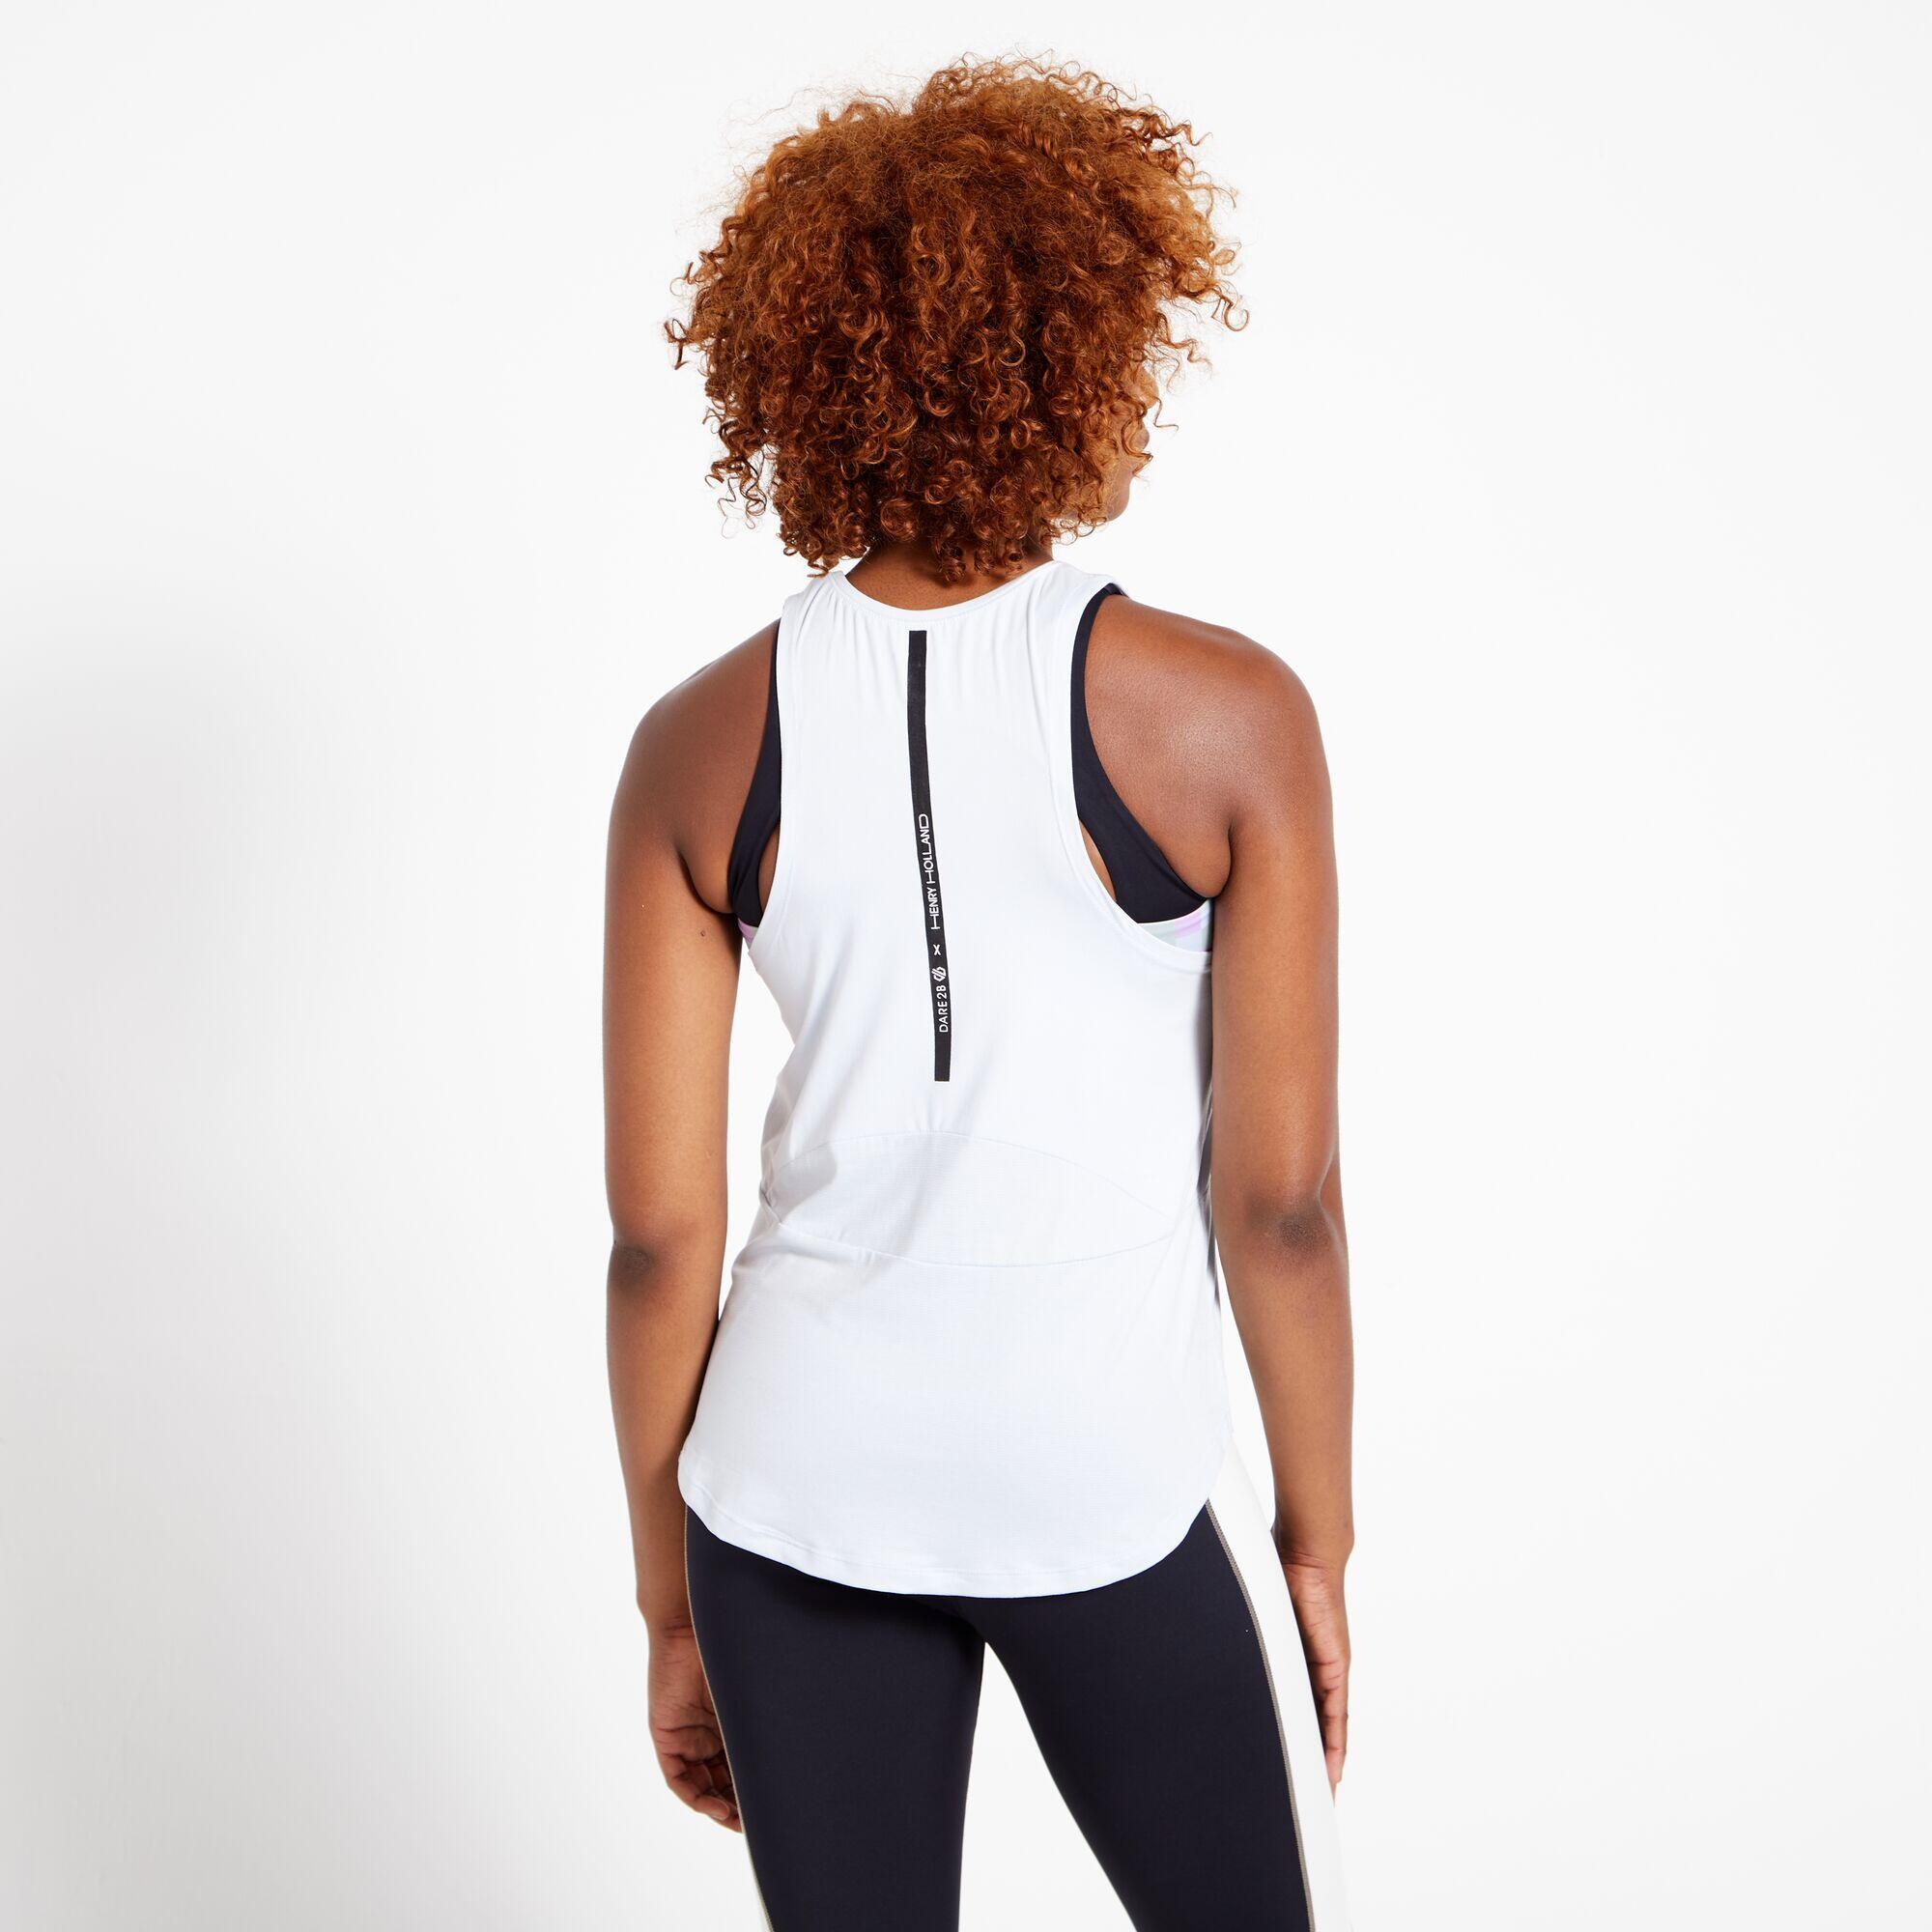 Henry Holland Cut Loose Womens Gym Vest - White 5/5